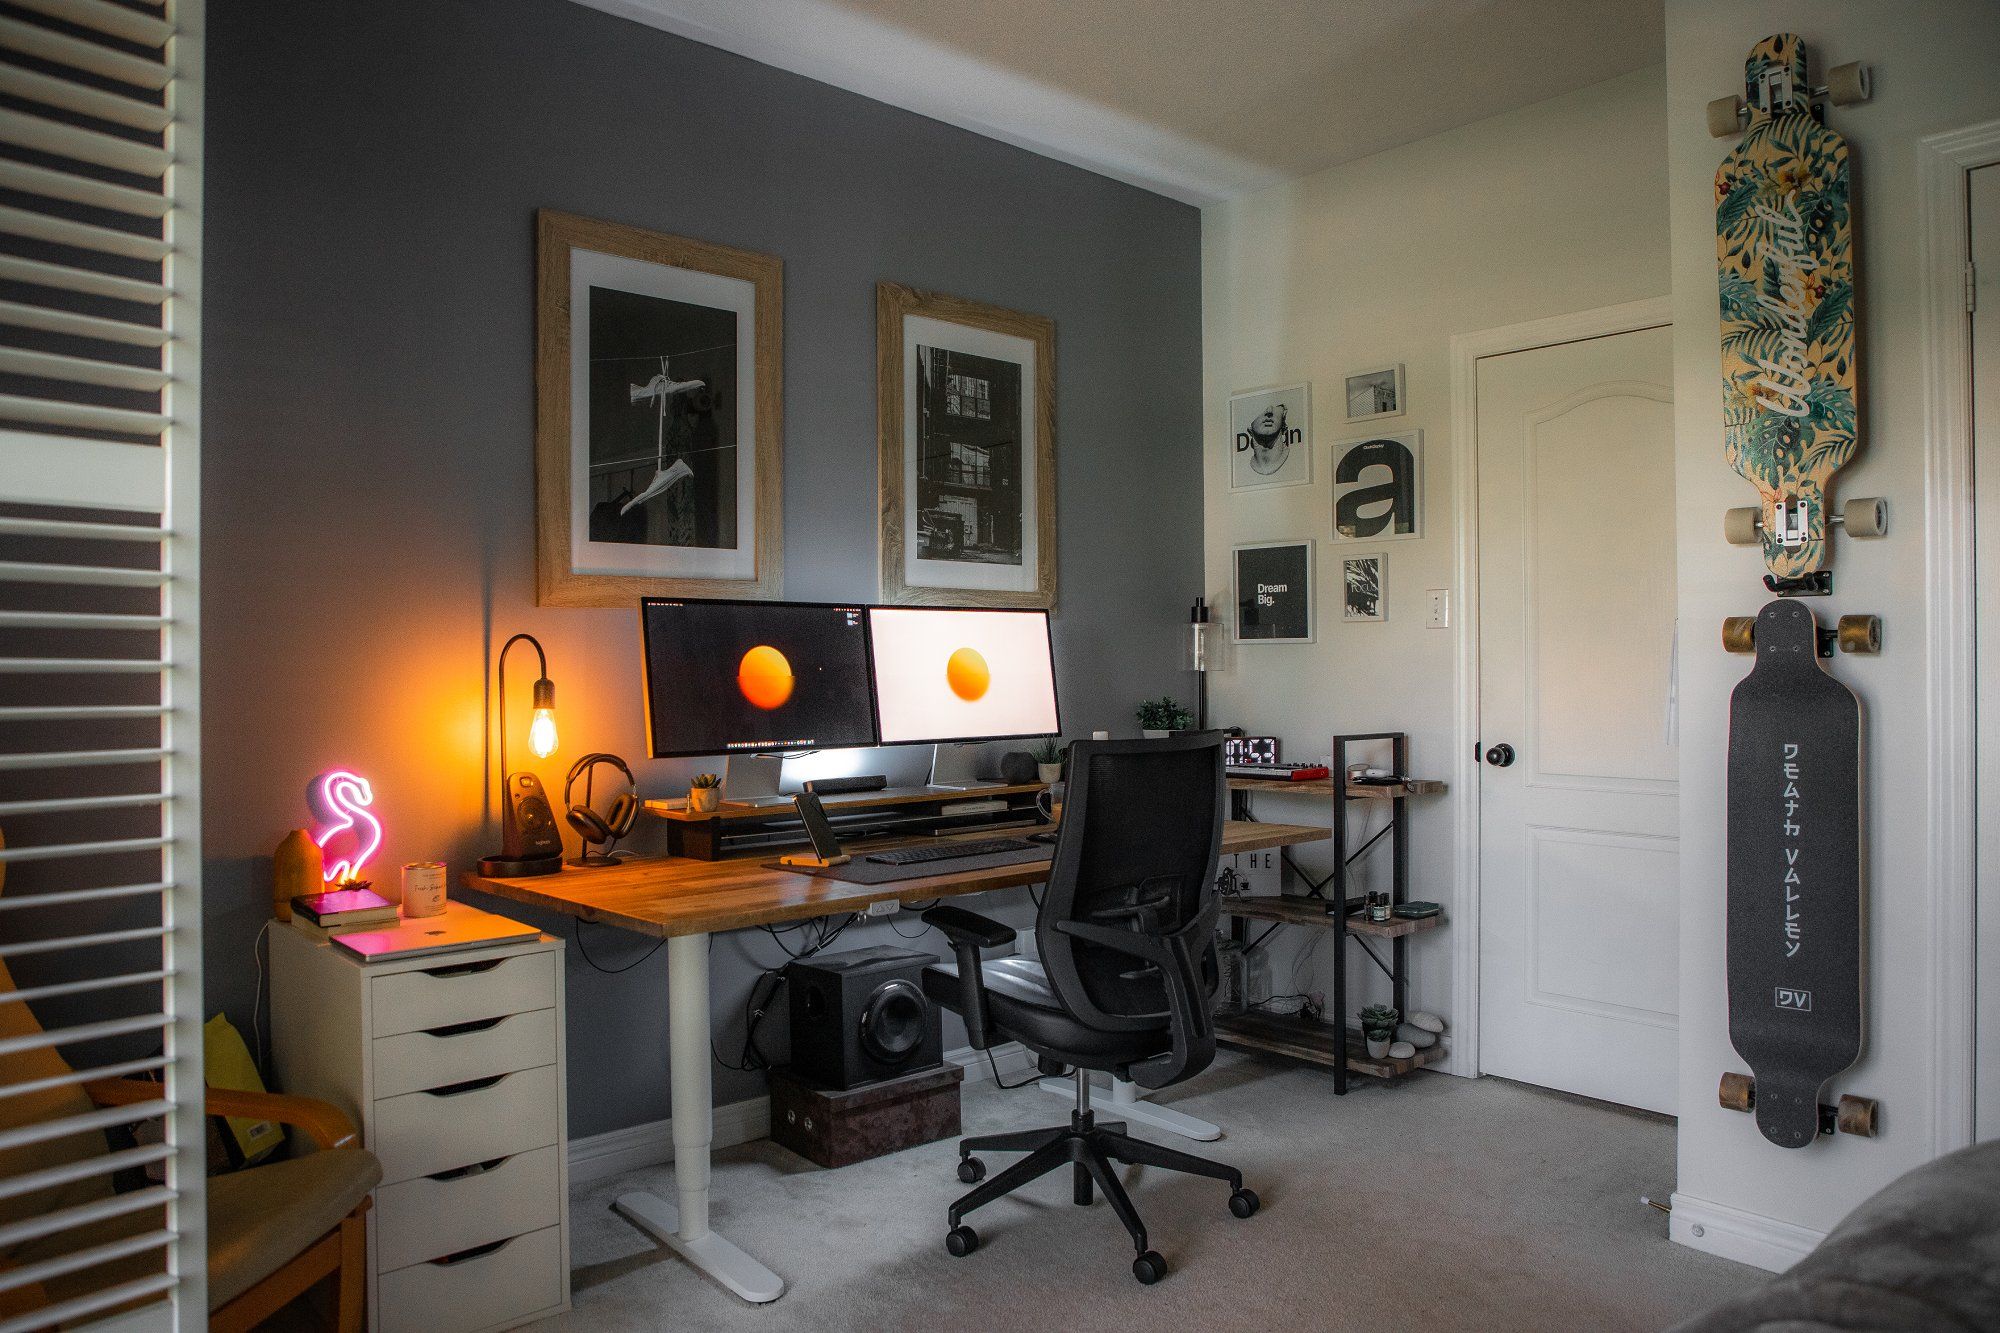 A smart designer home office includes a standing desk, ergonomic chair, dual monitors, and storage